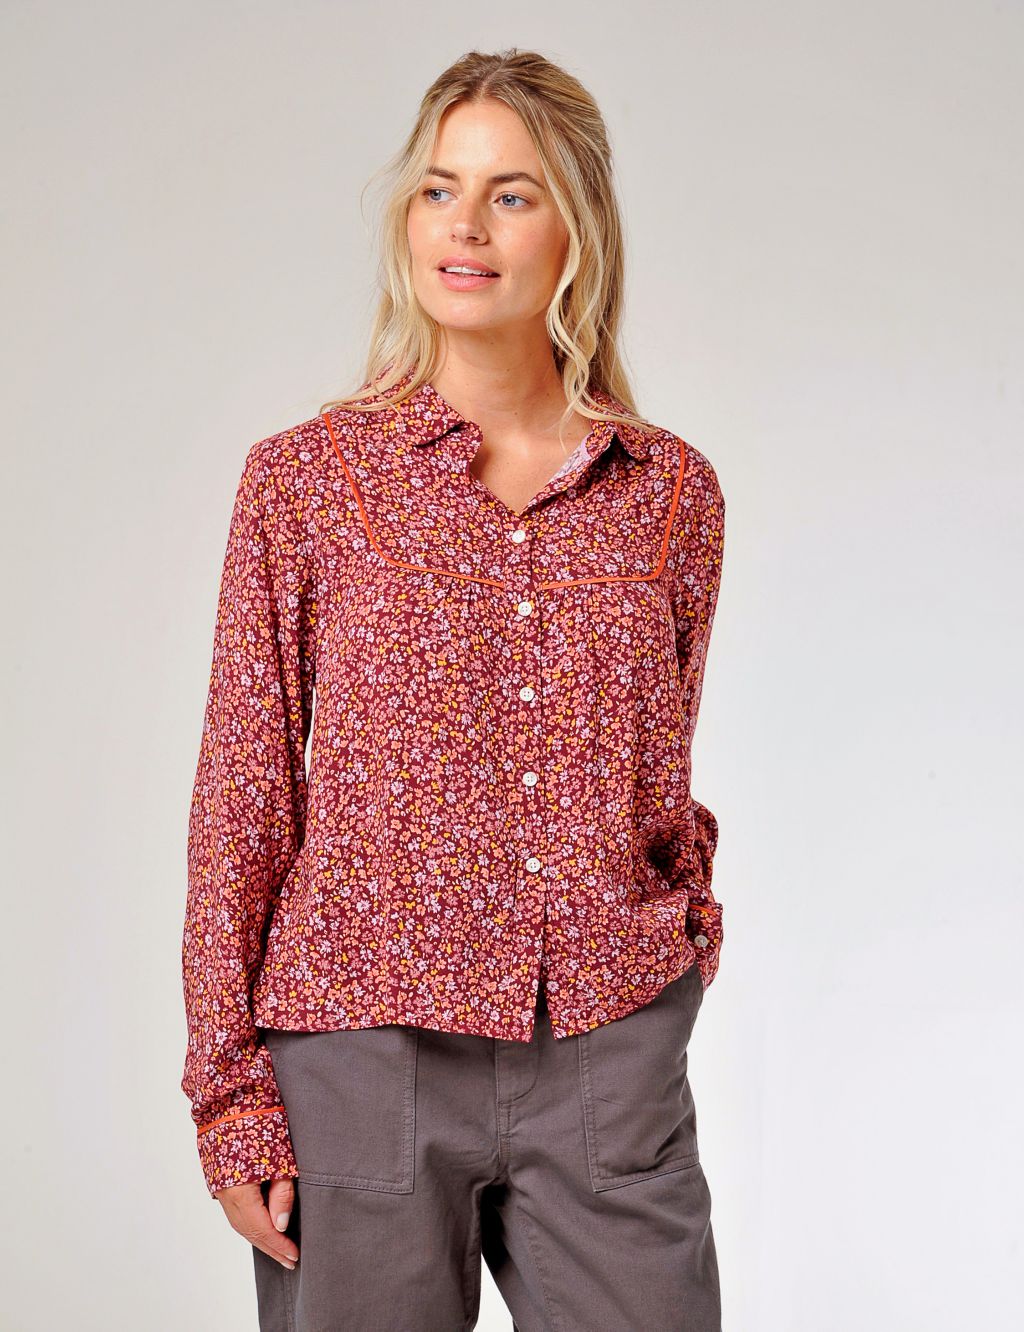 Ditsy Floral Collared Shirt image 2